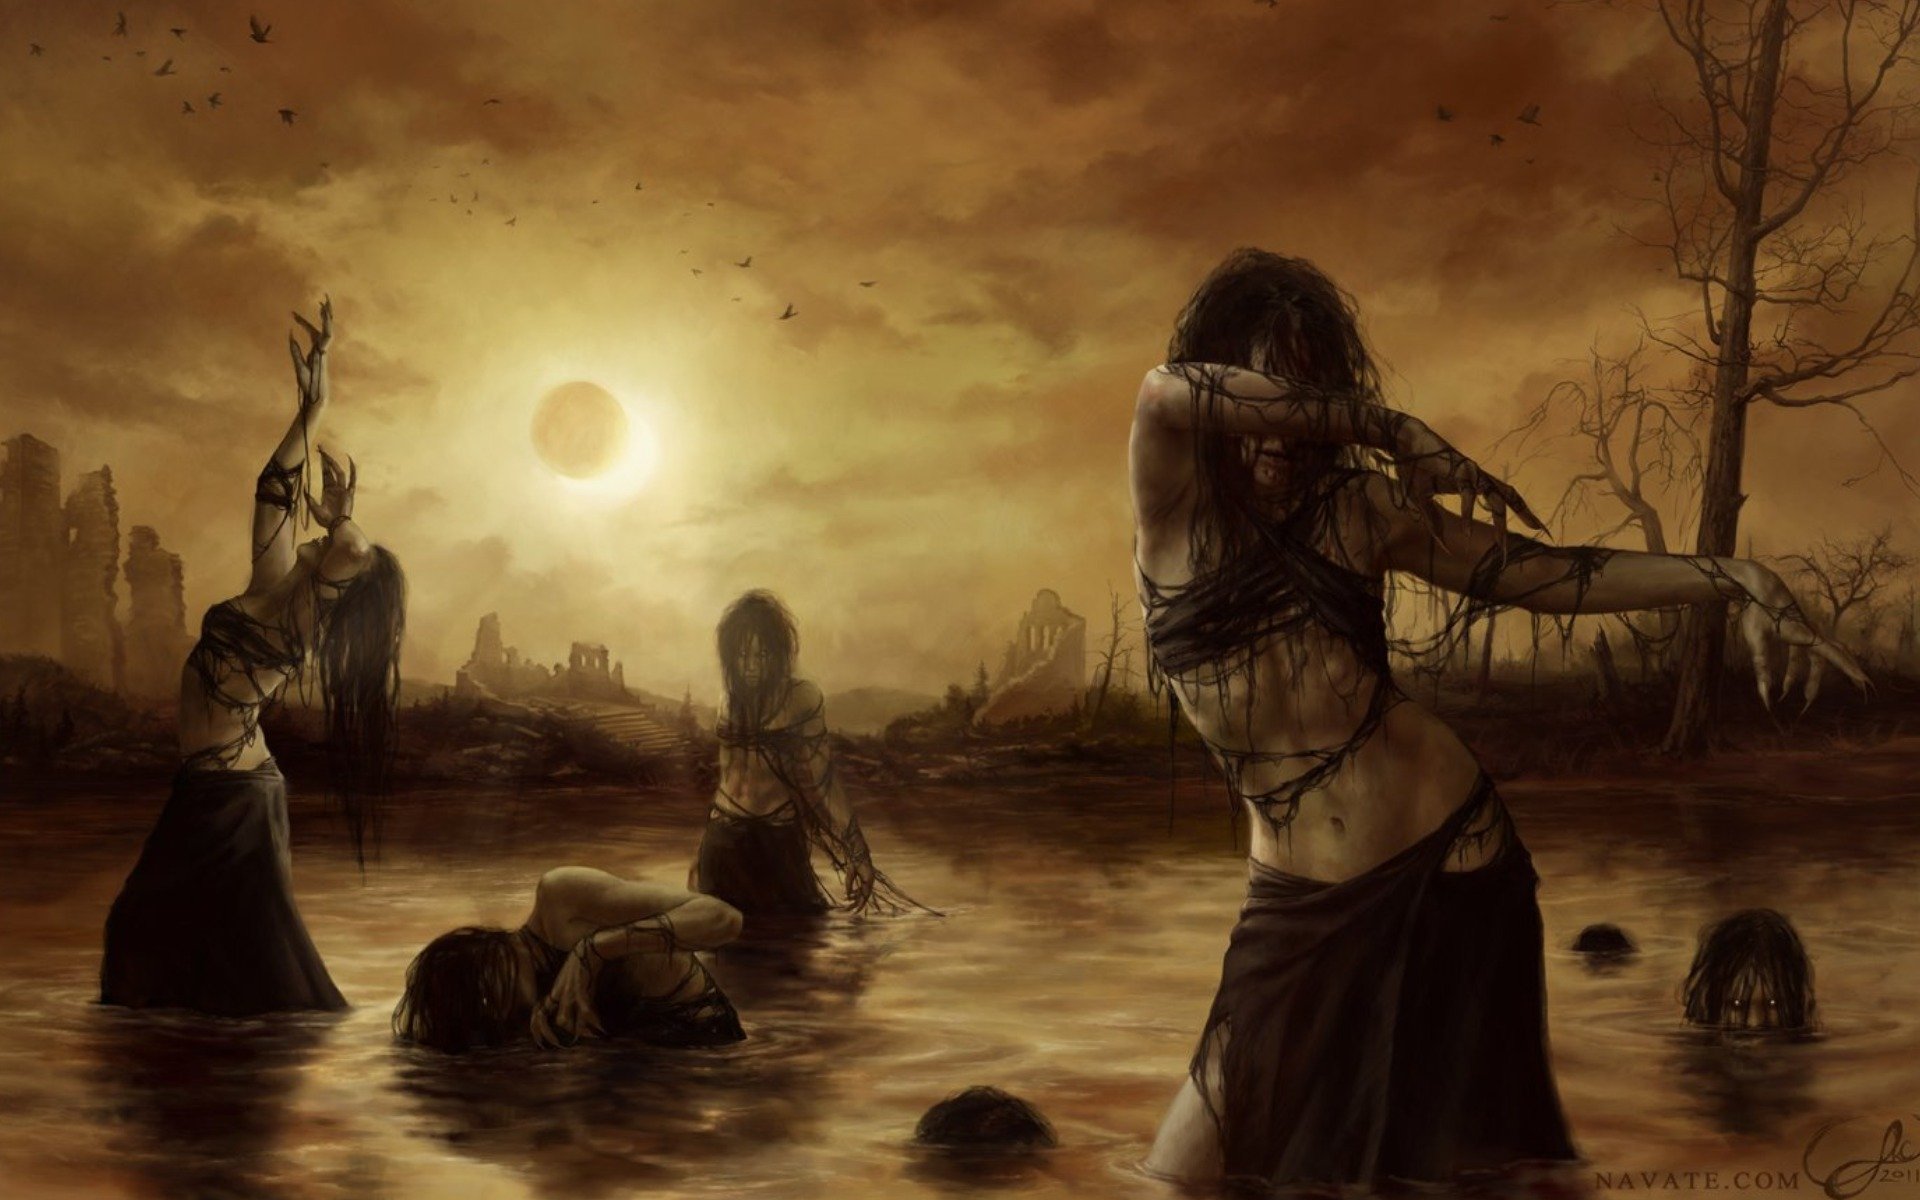 2d, Horror, Ruins, Swamp, Witches, Eclipse, Fantasy, Witch Wallpaper